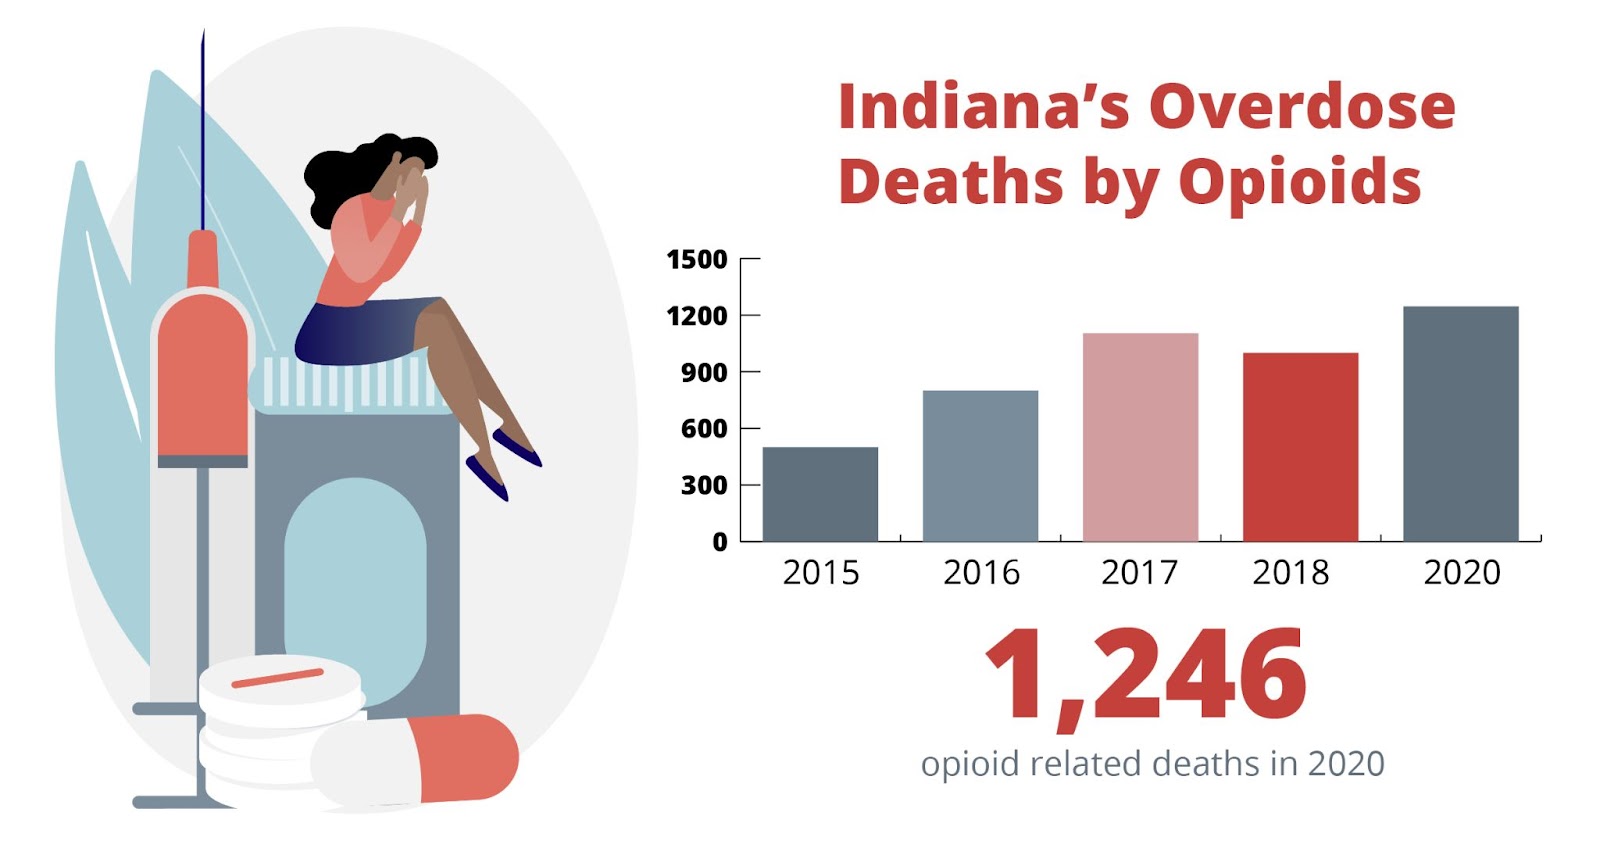 Indiana's overdose deaths by opioids graph. 1,246 opioid related deaths in 2020